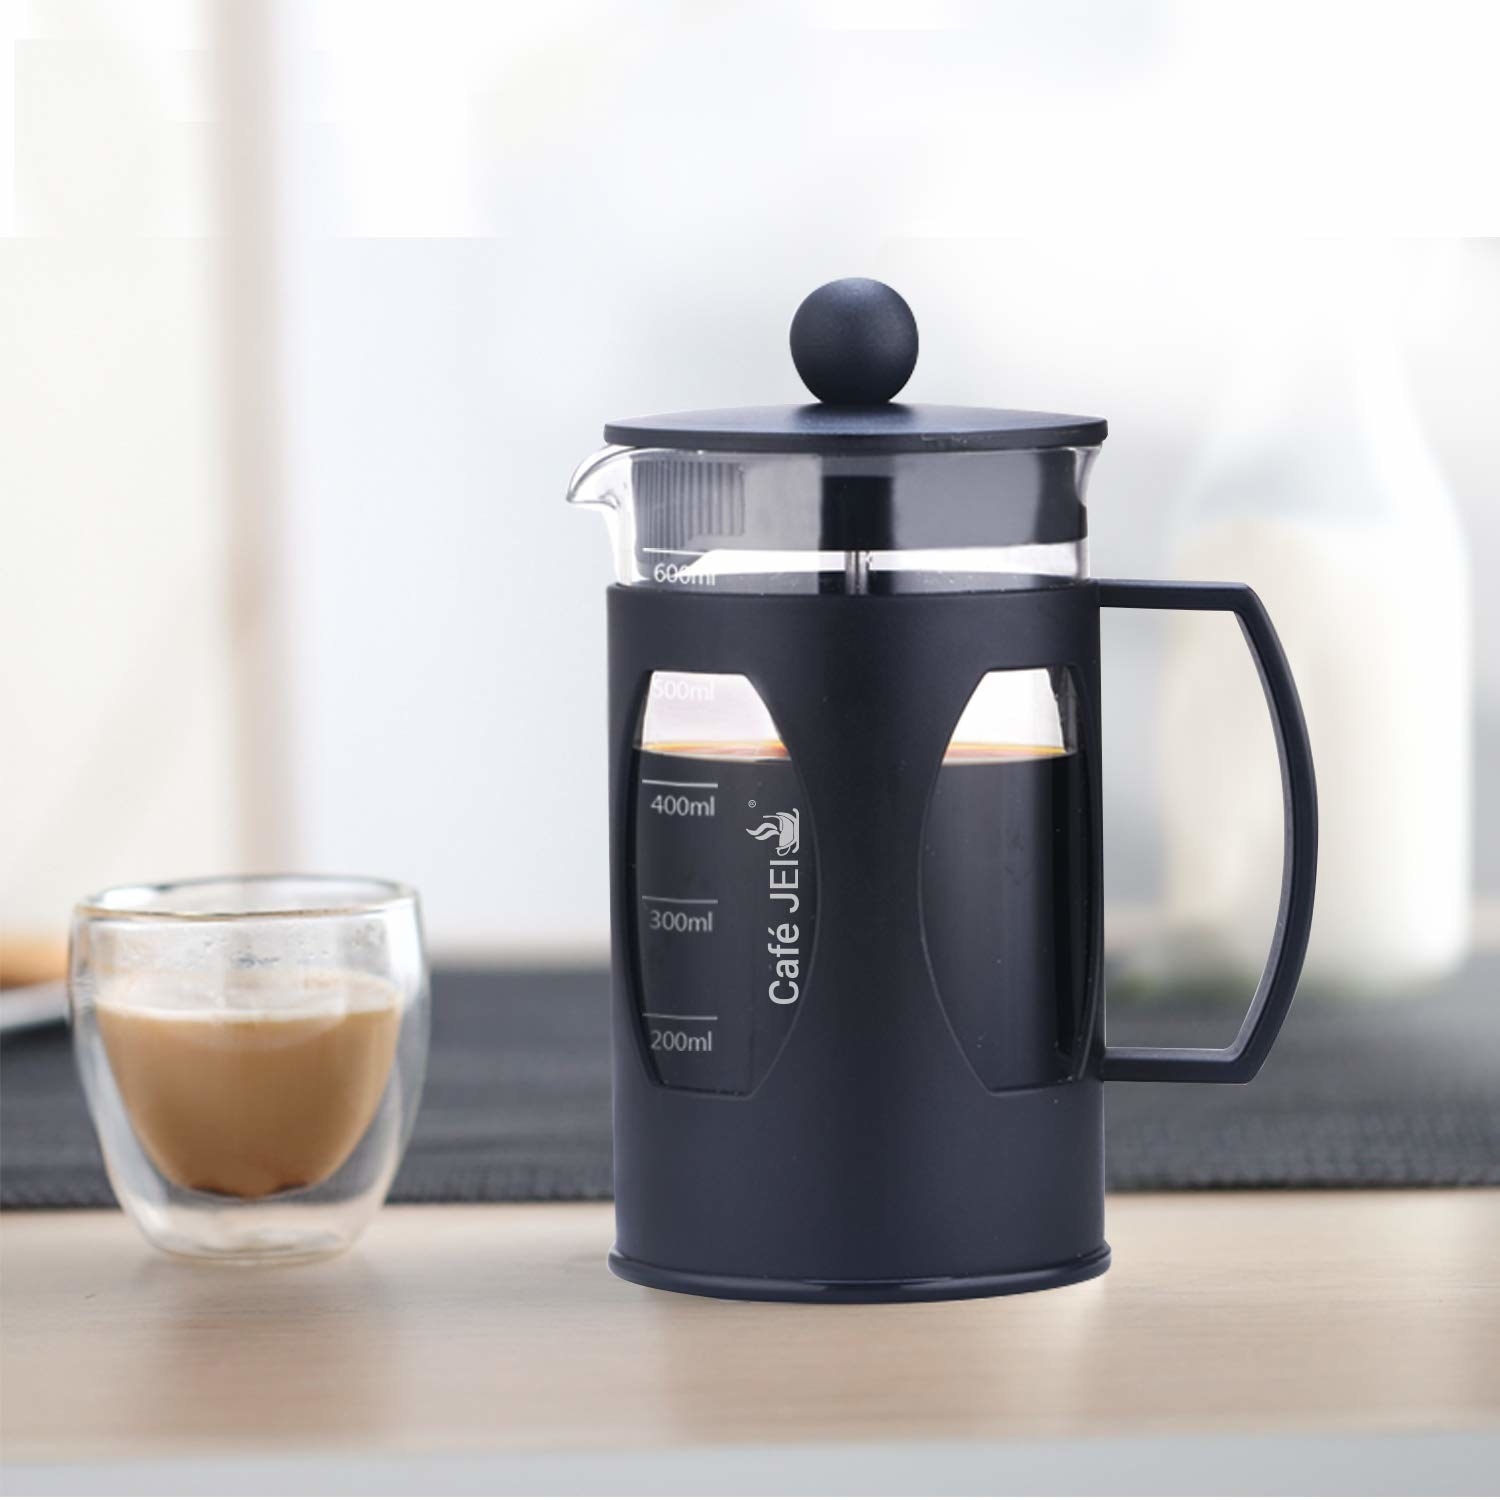 A French Press coffee maker next to a cup of coffee